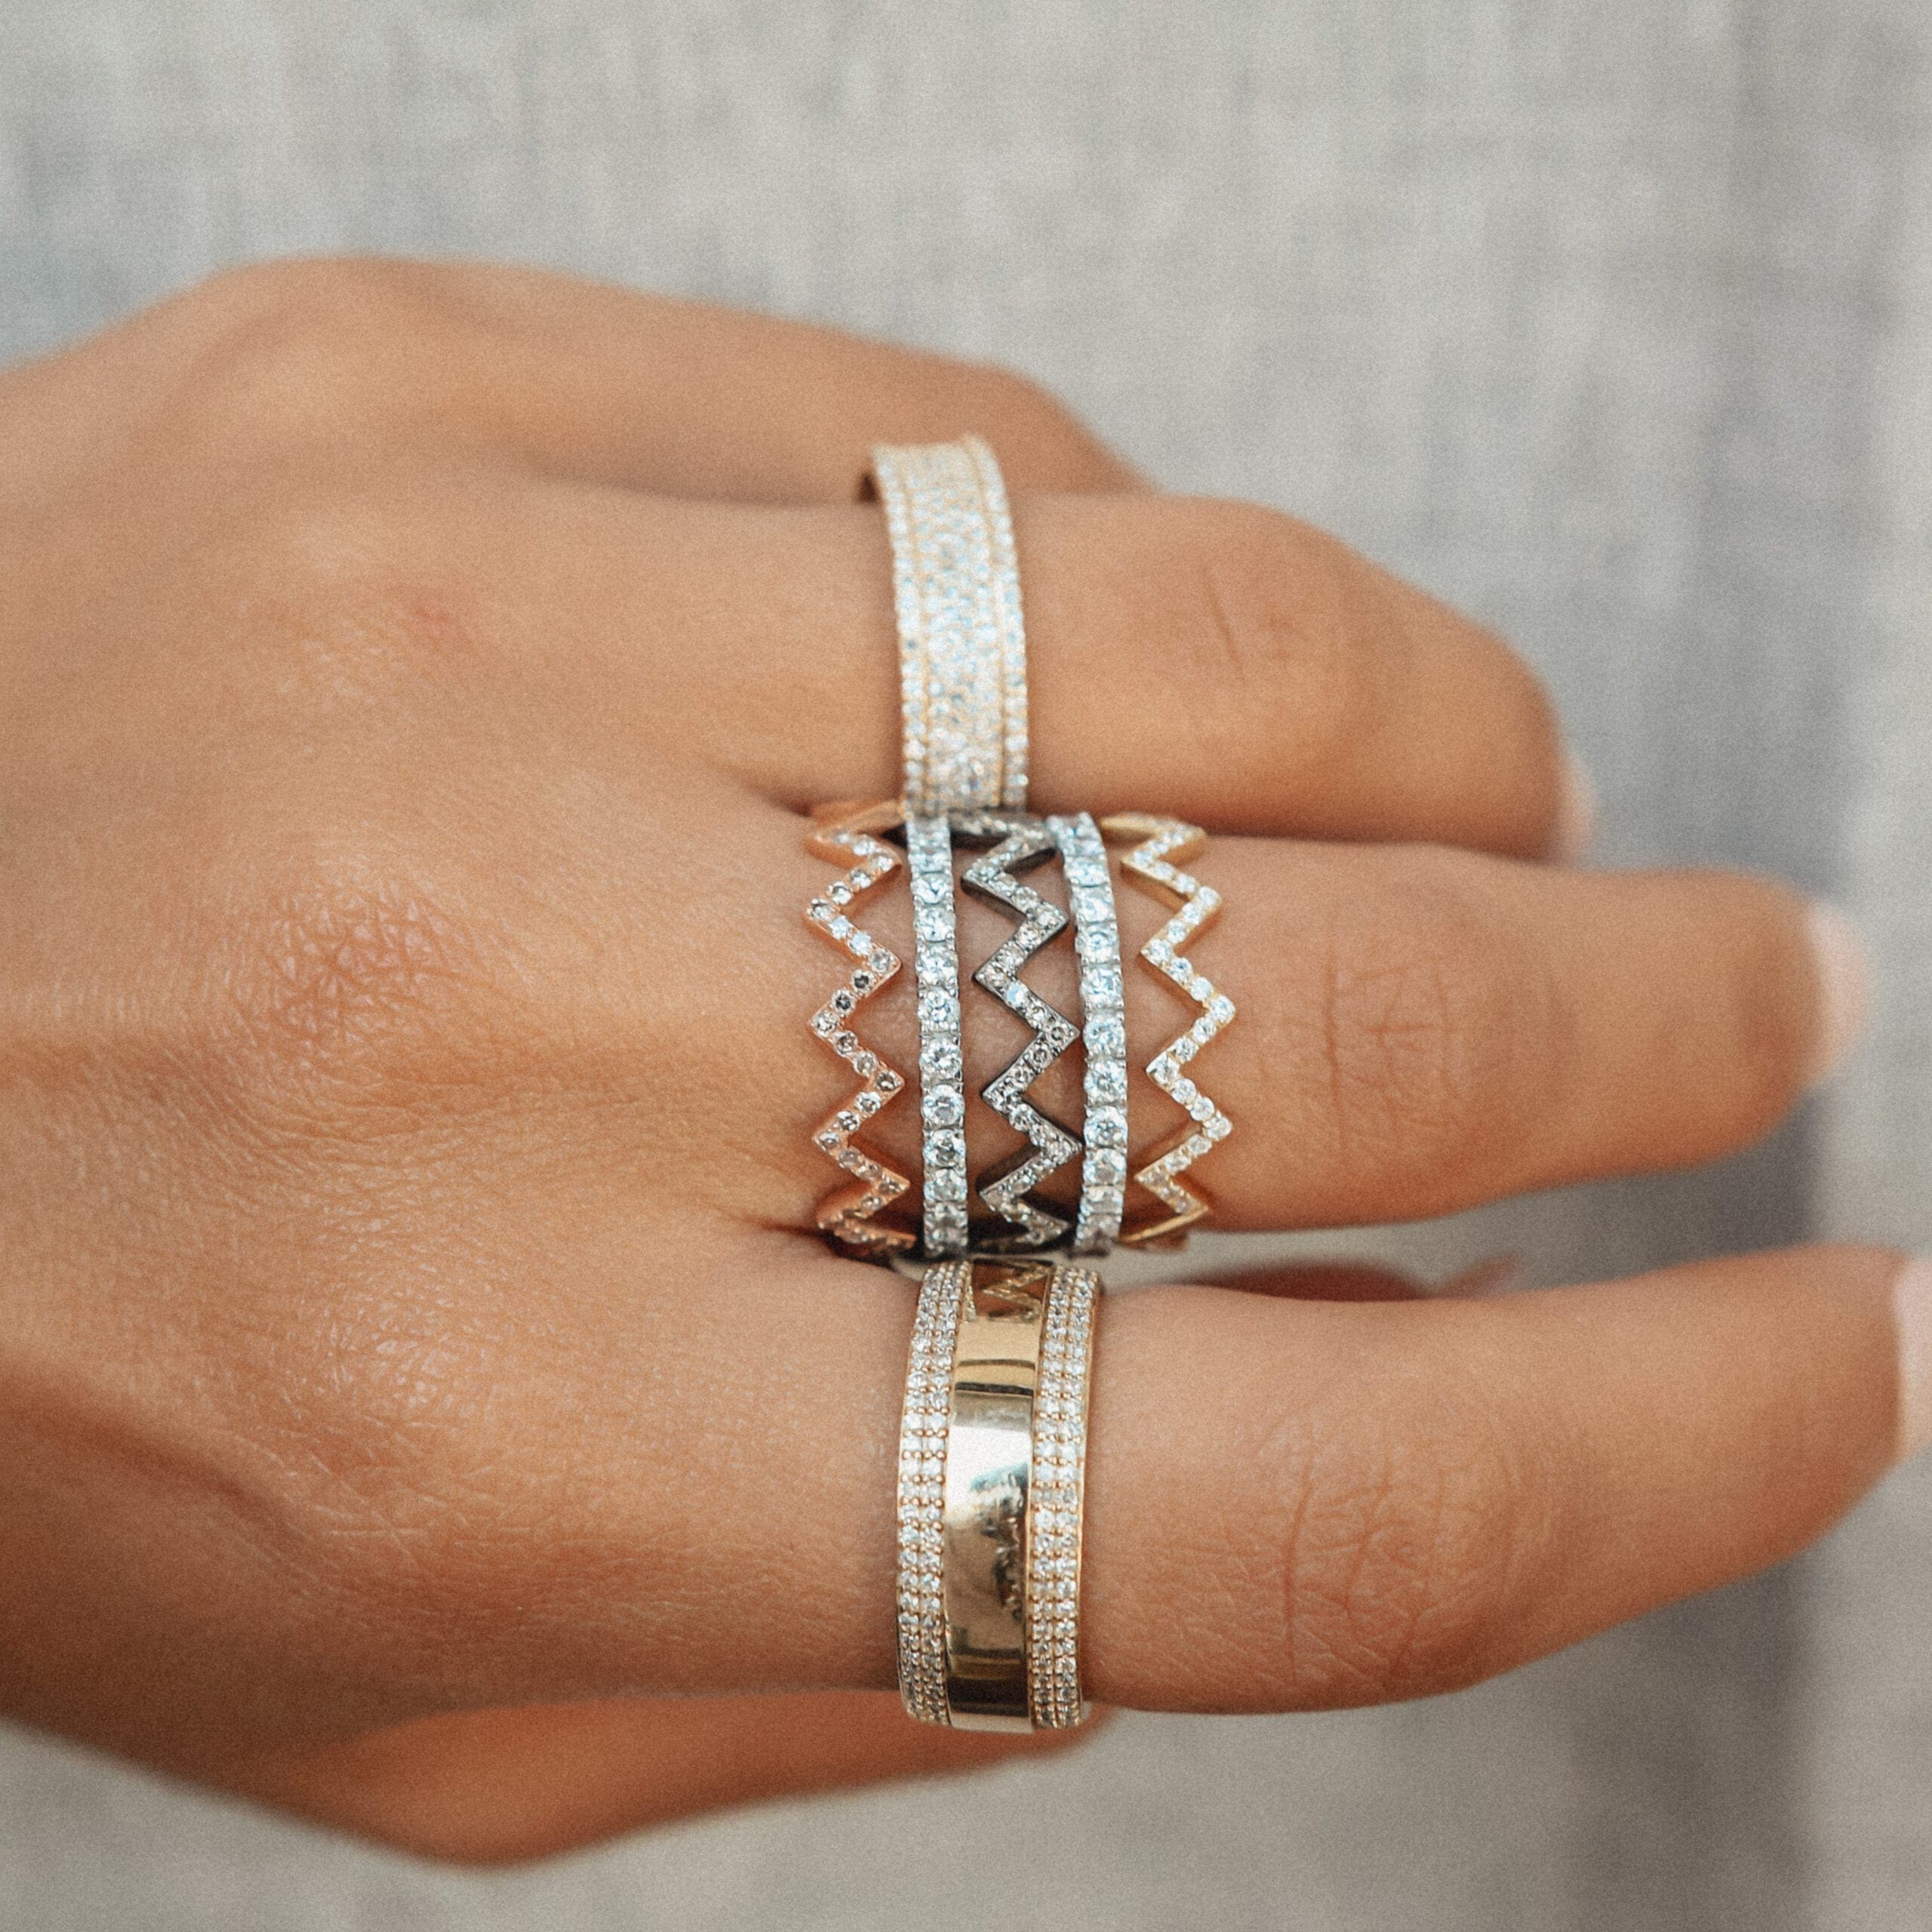 Wide Eternity Band with Rows of Diamonds